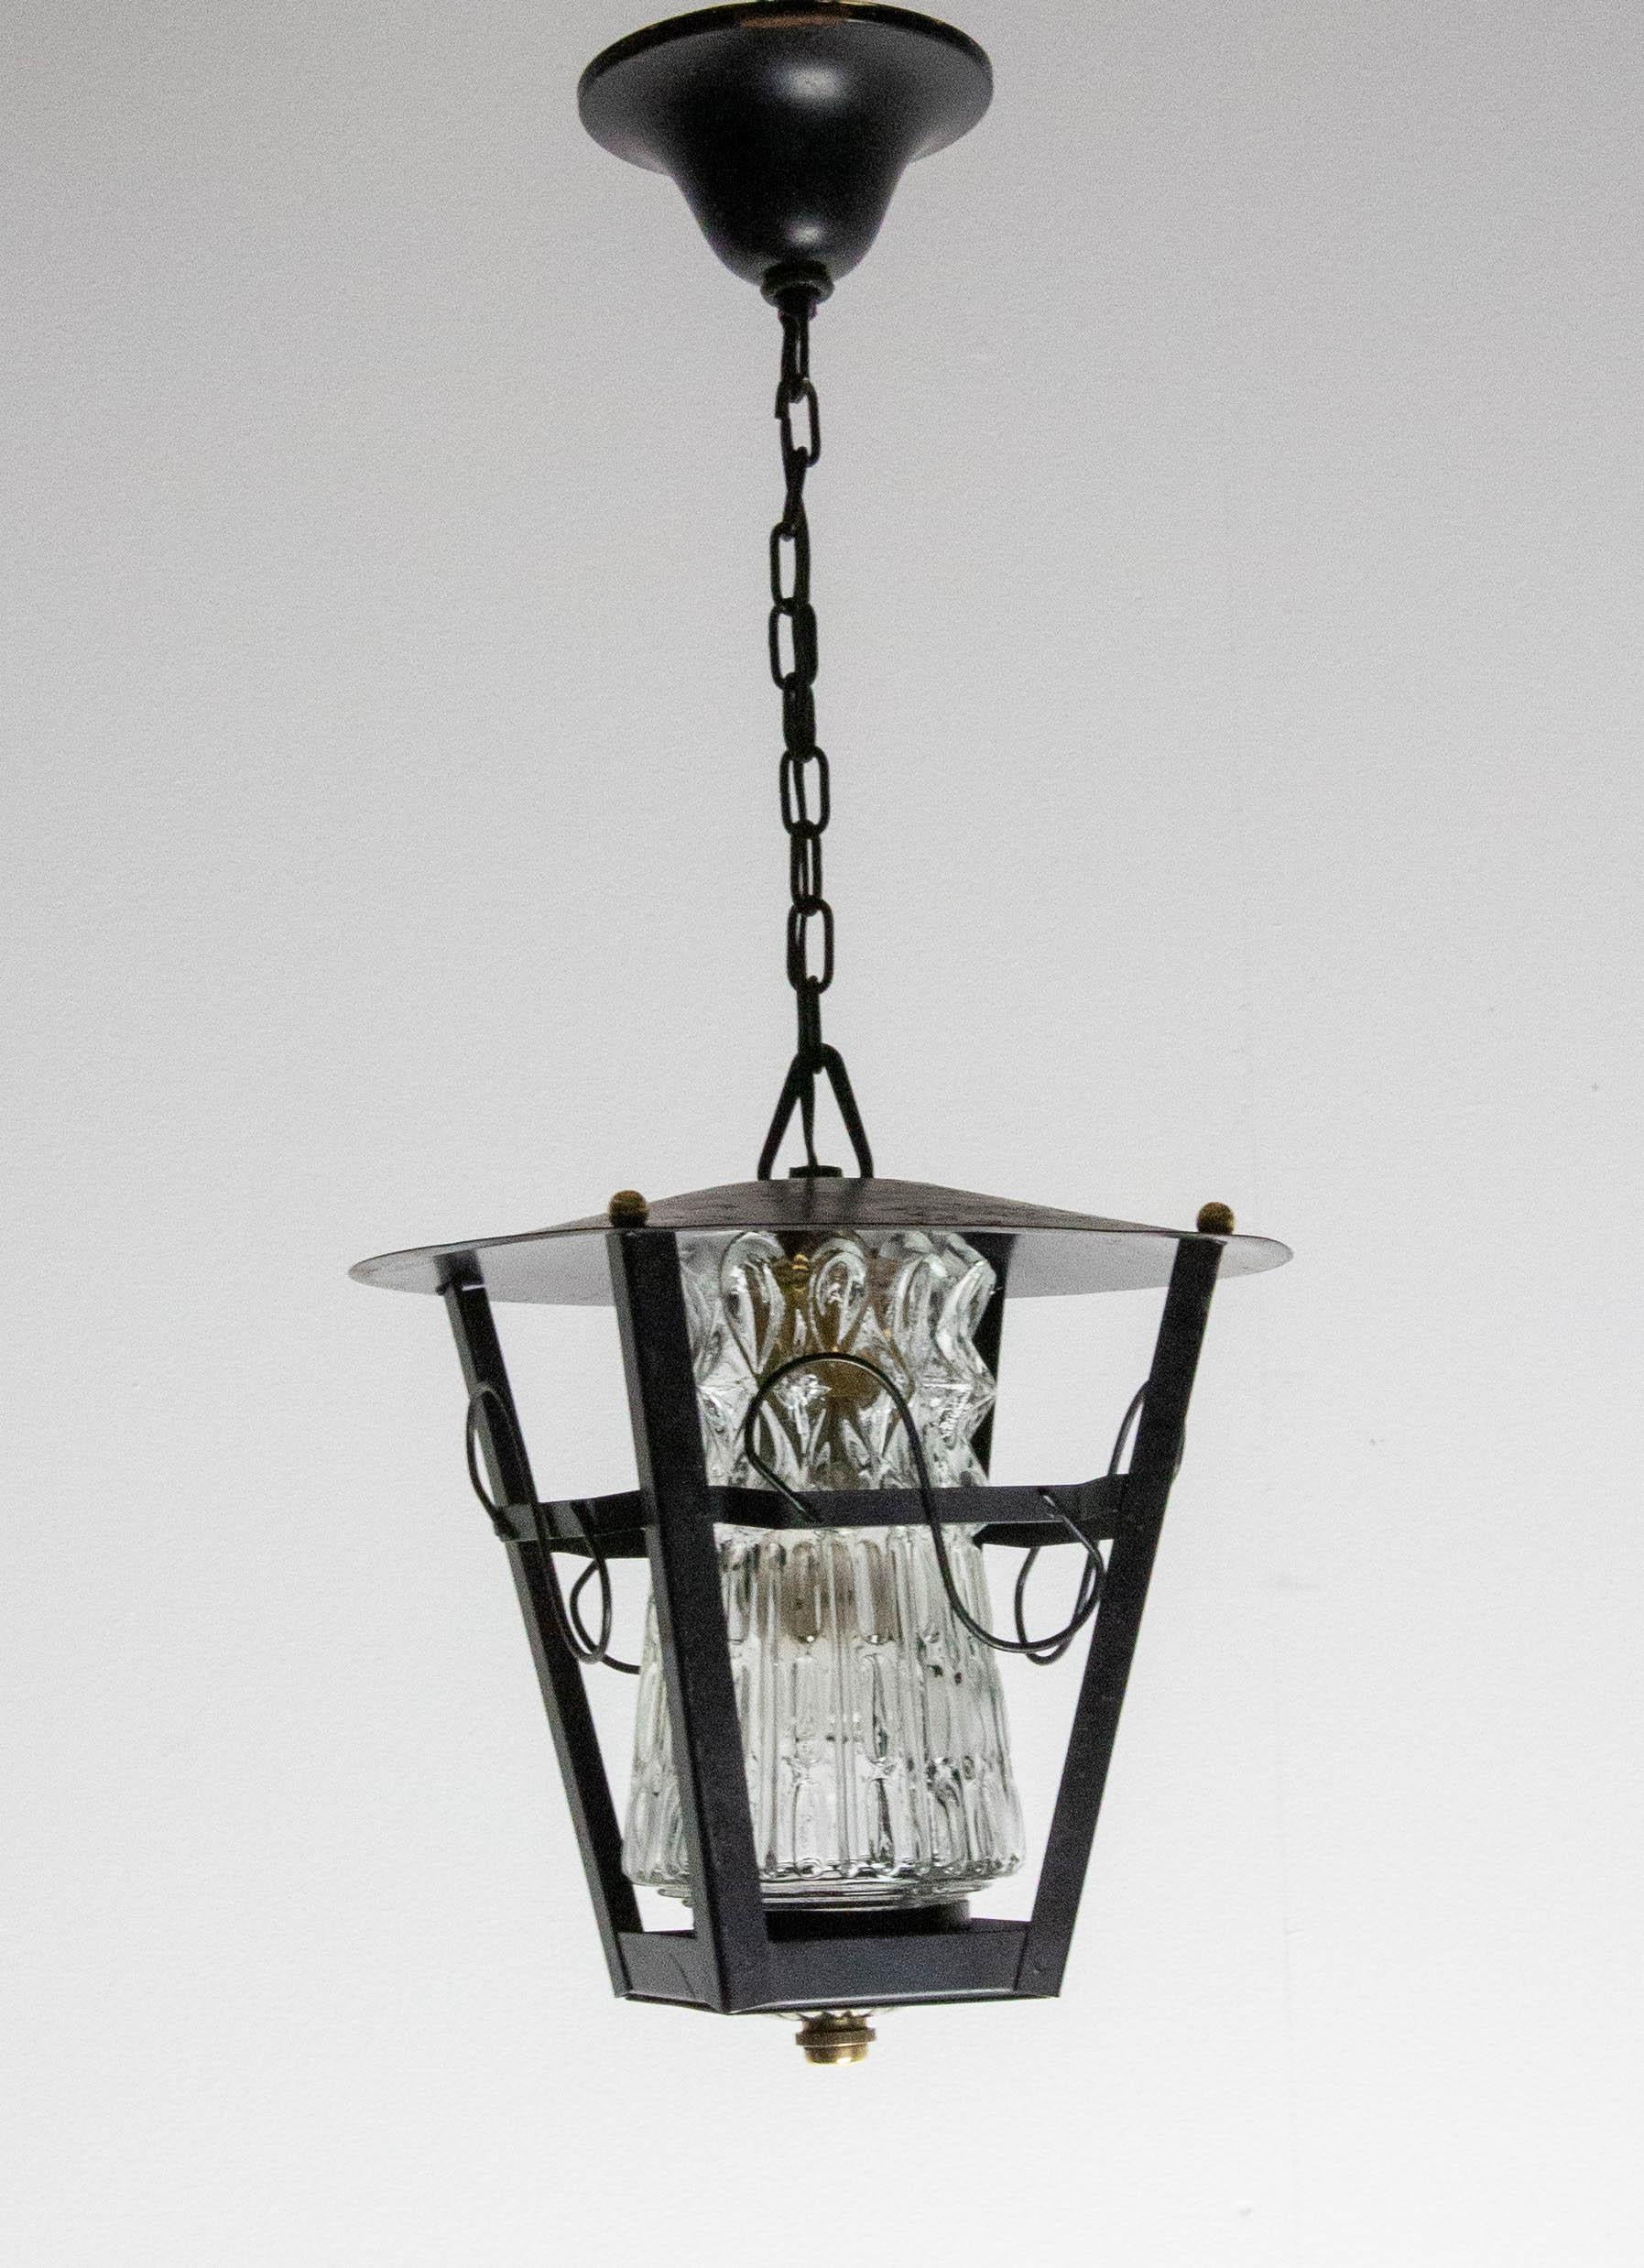 Pendant light chandelier, France, midcentury
Textured glass globe and iron
This can be rewired to USA, UK and European standards
Good condition.

Shipping
D23 H23 1.3KG.

